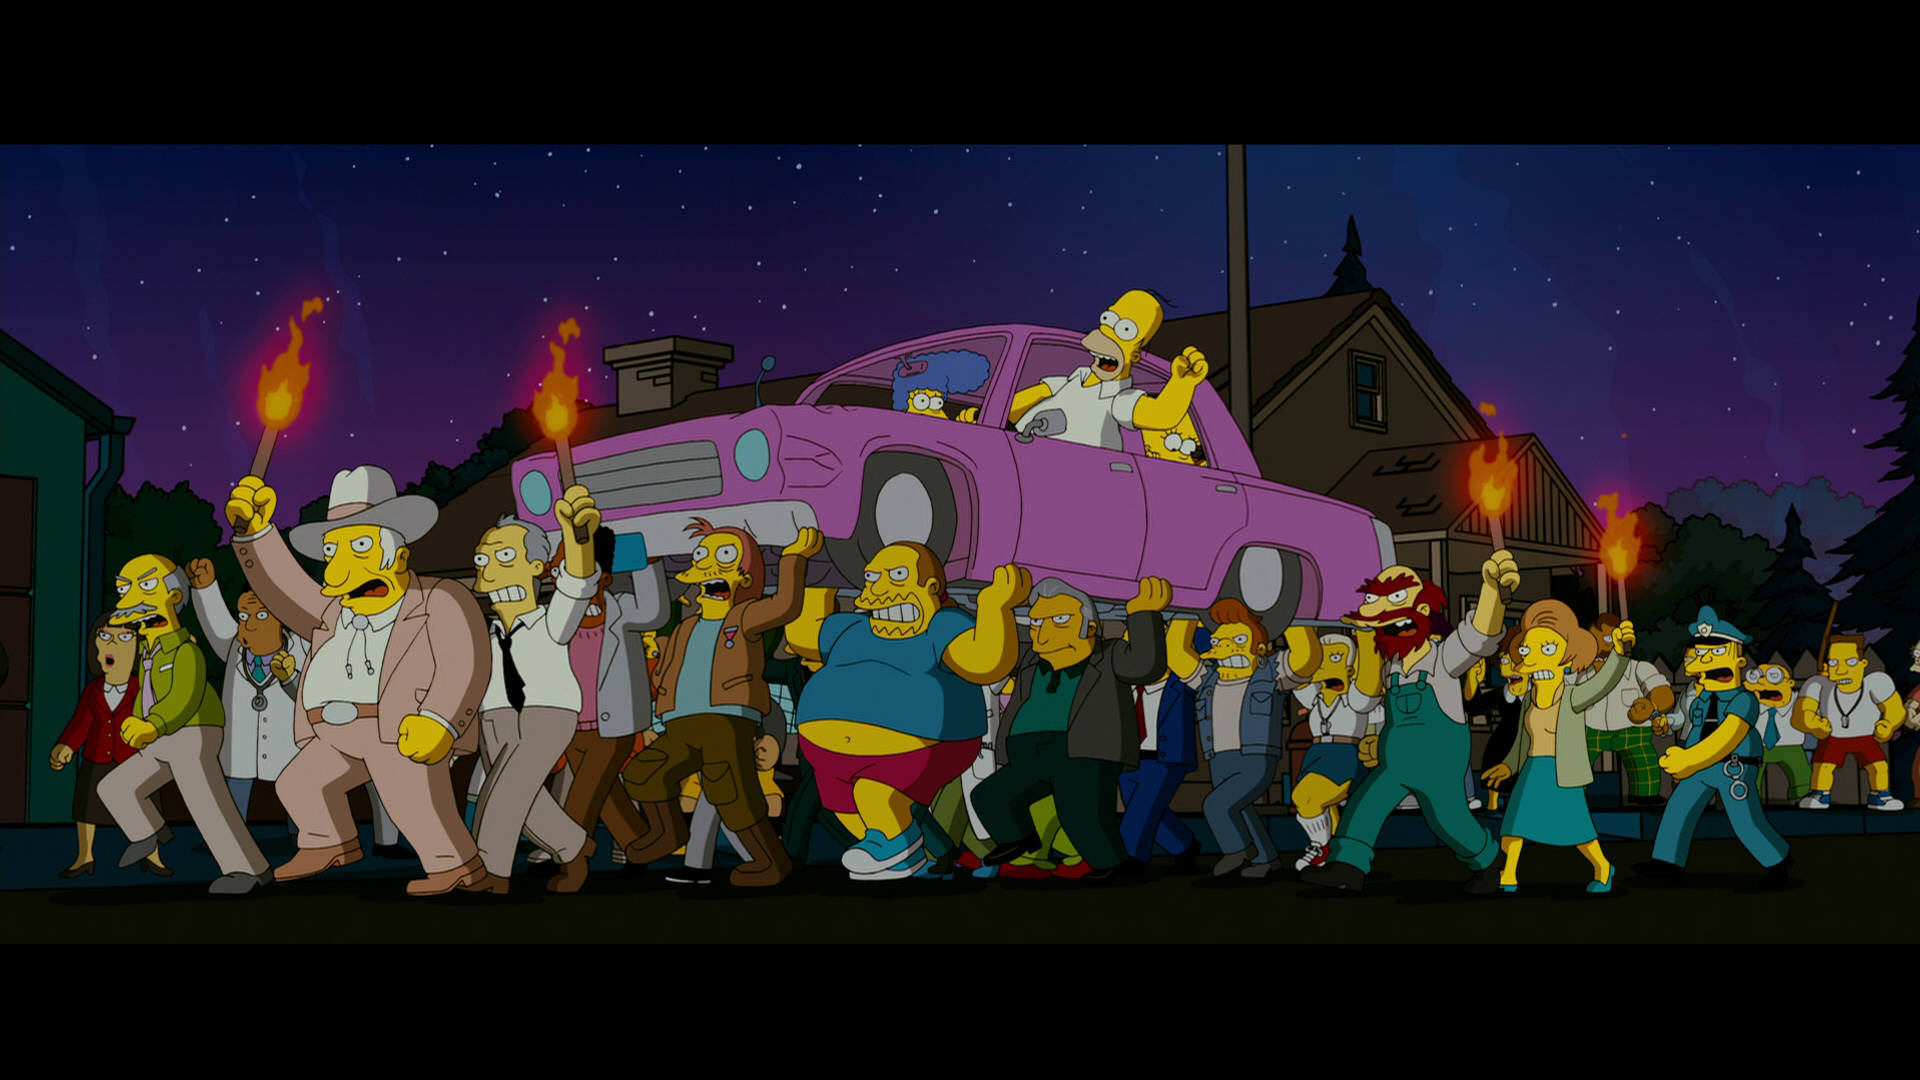 Rallying Crowd From The Simpsons Movie Wallpaper